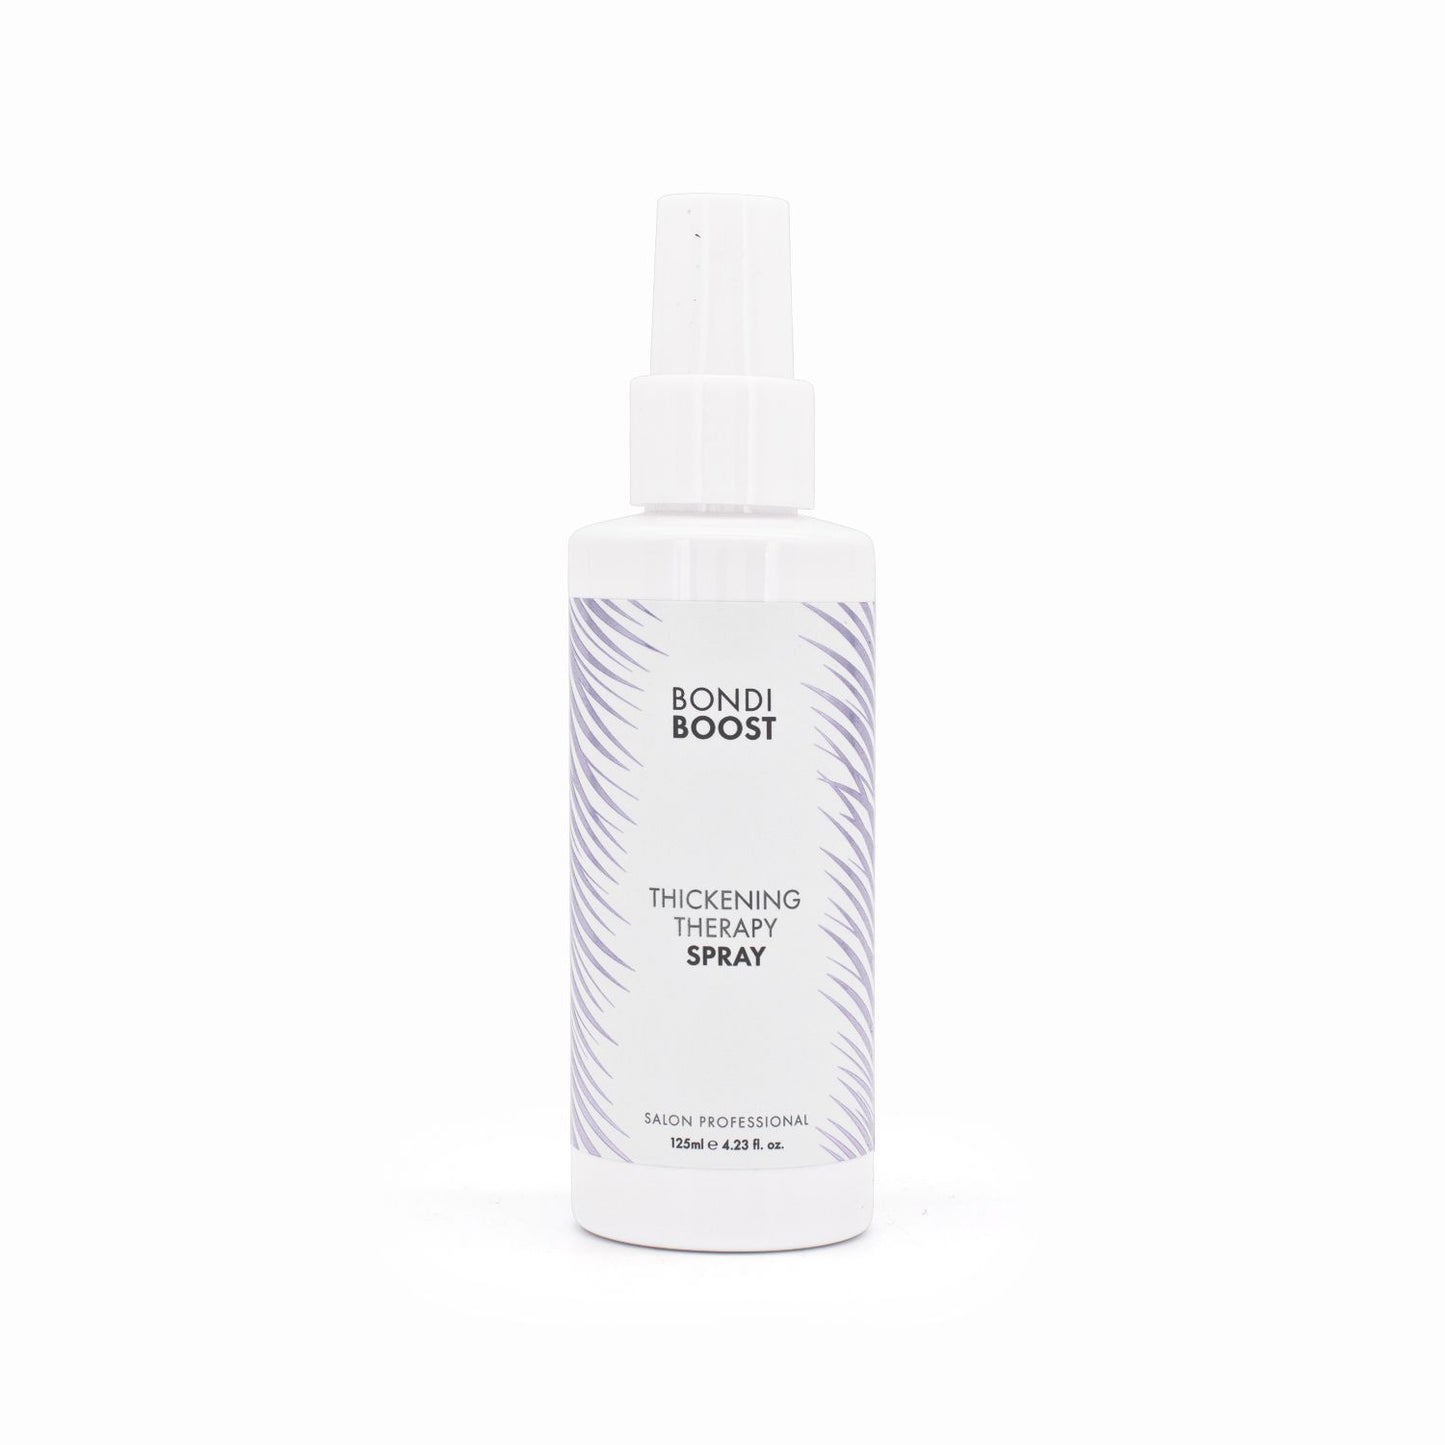 BondiBoost Thickening Therapy Spray 125ml - Imperfect Container